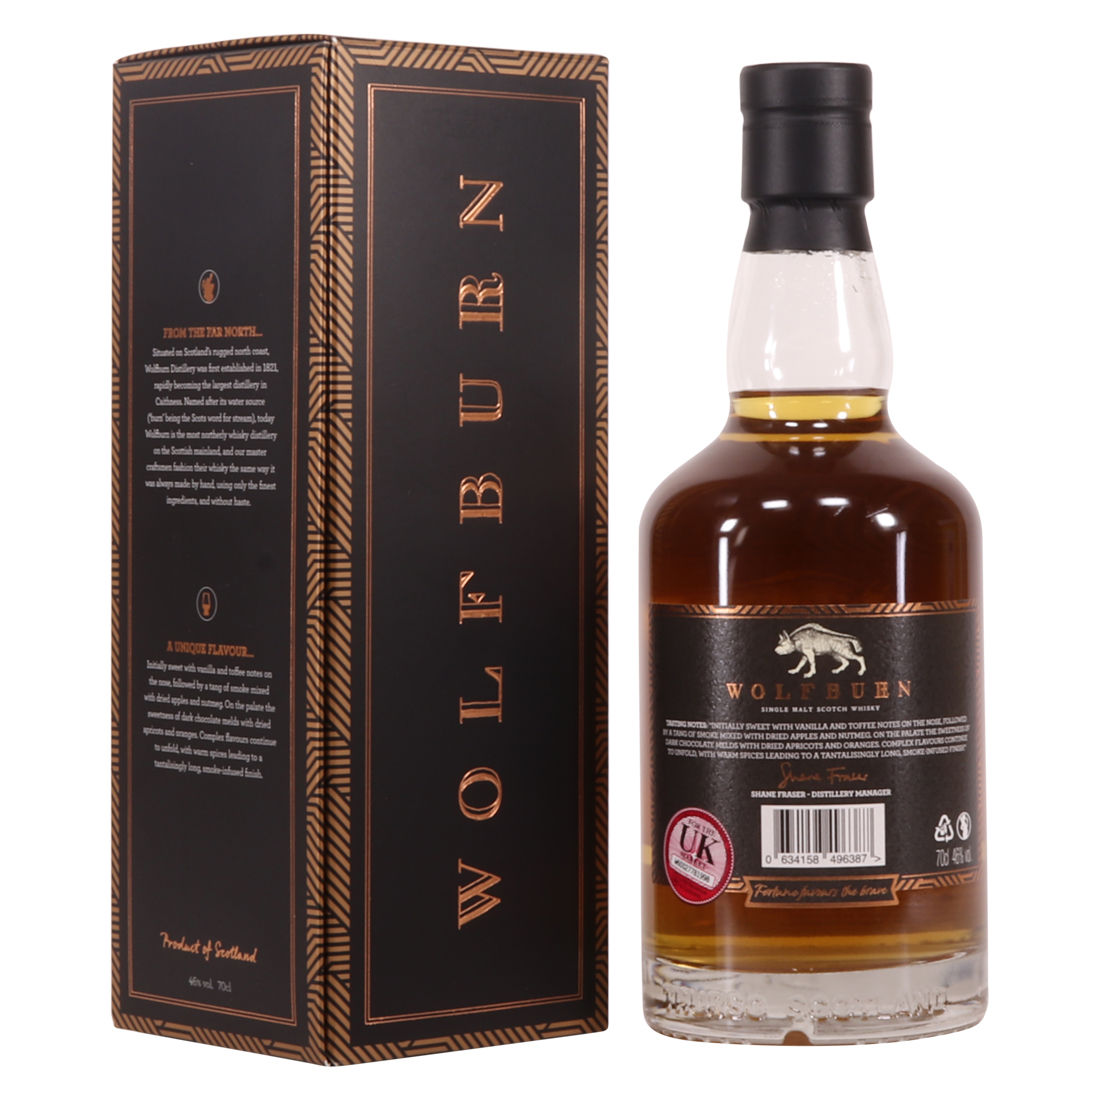 Wolfburn - No.128 Small Batch Auction | The Grand Whisky Auction